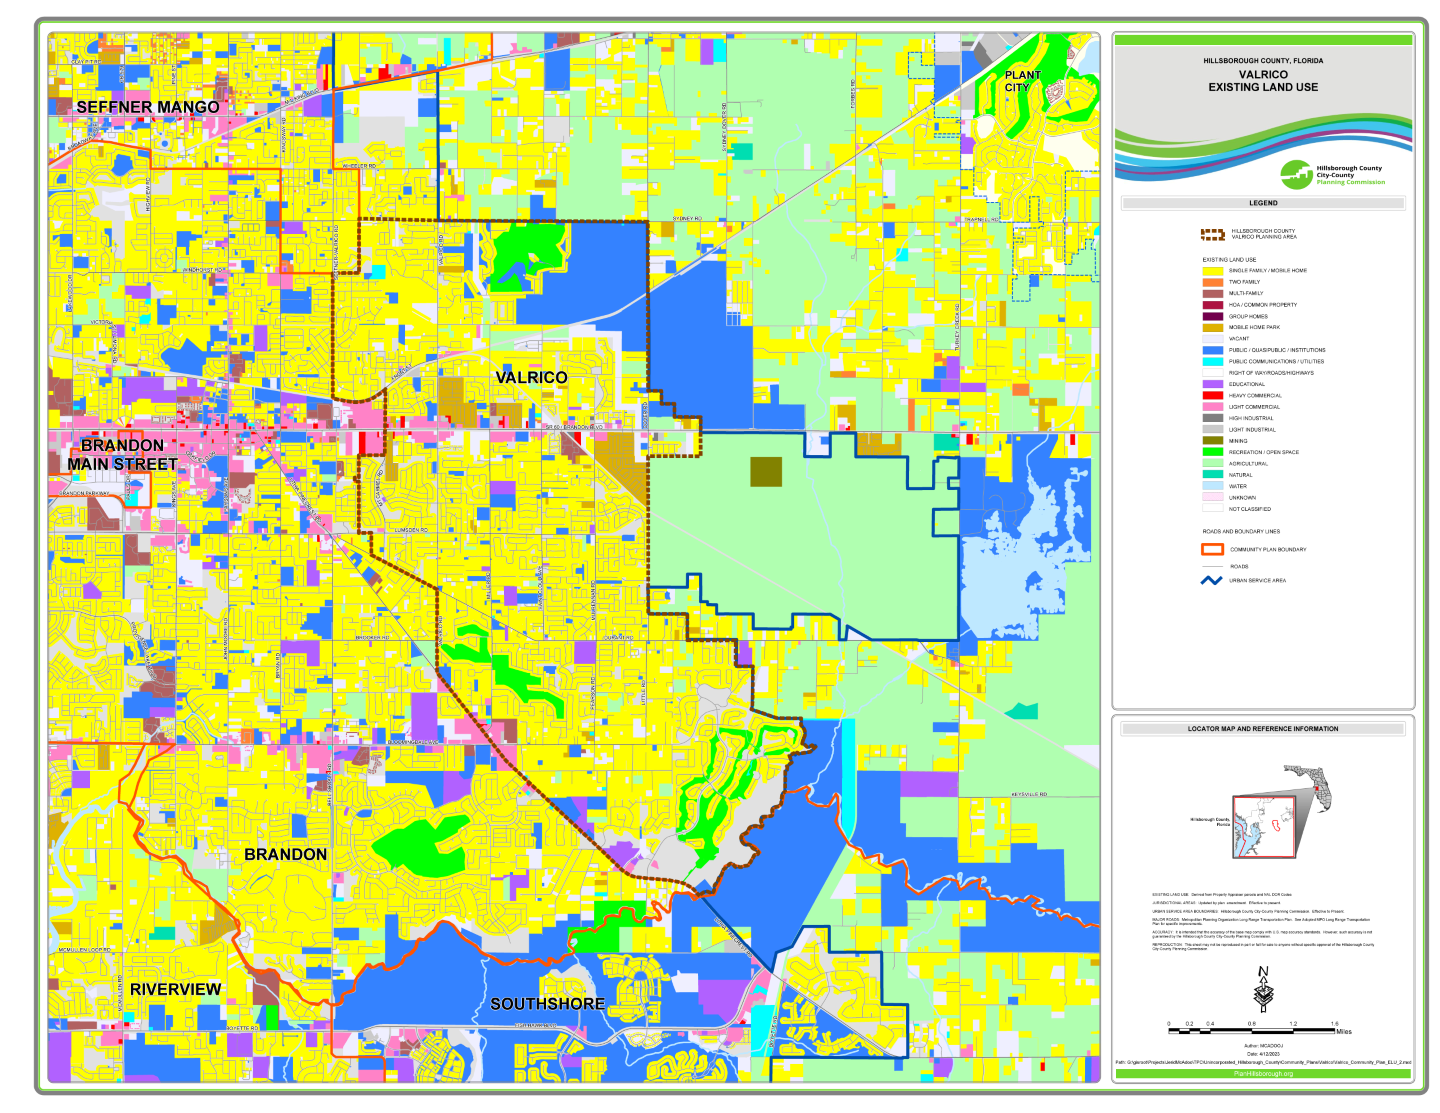 Valrico Existing Land Use